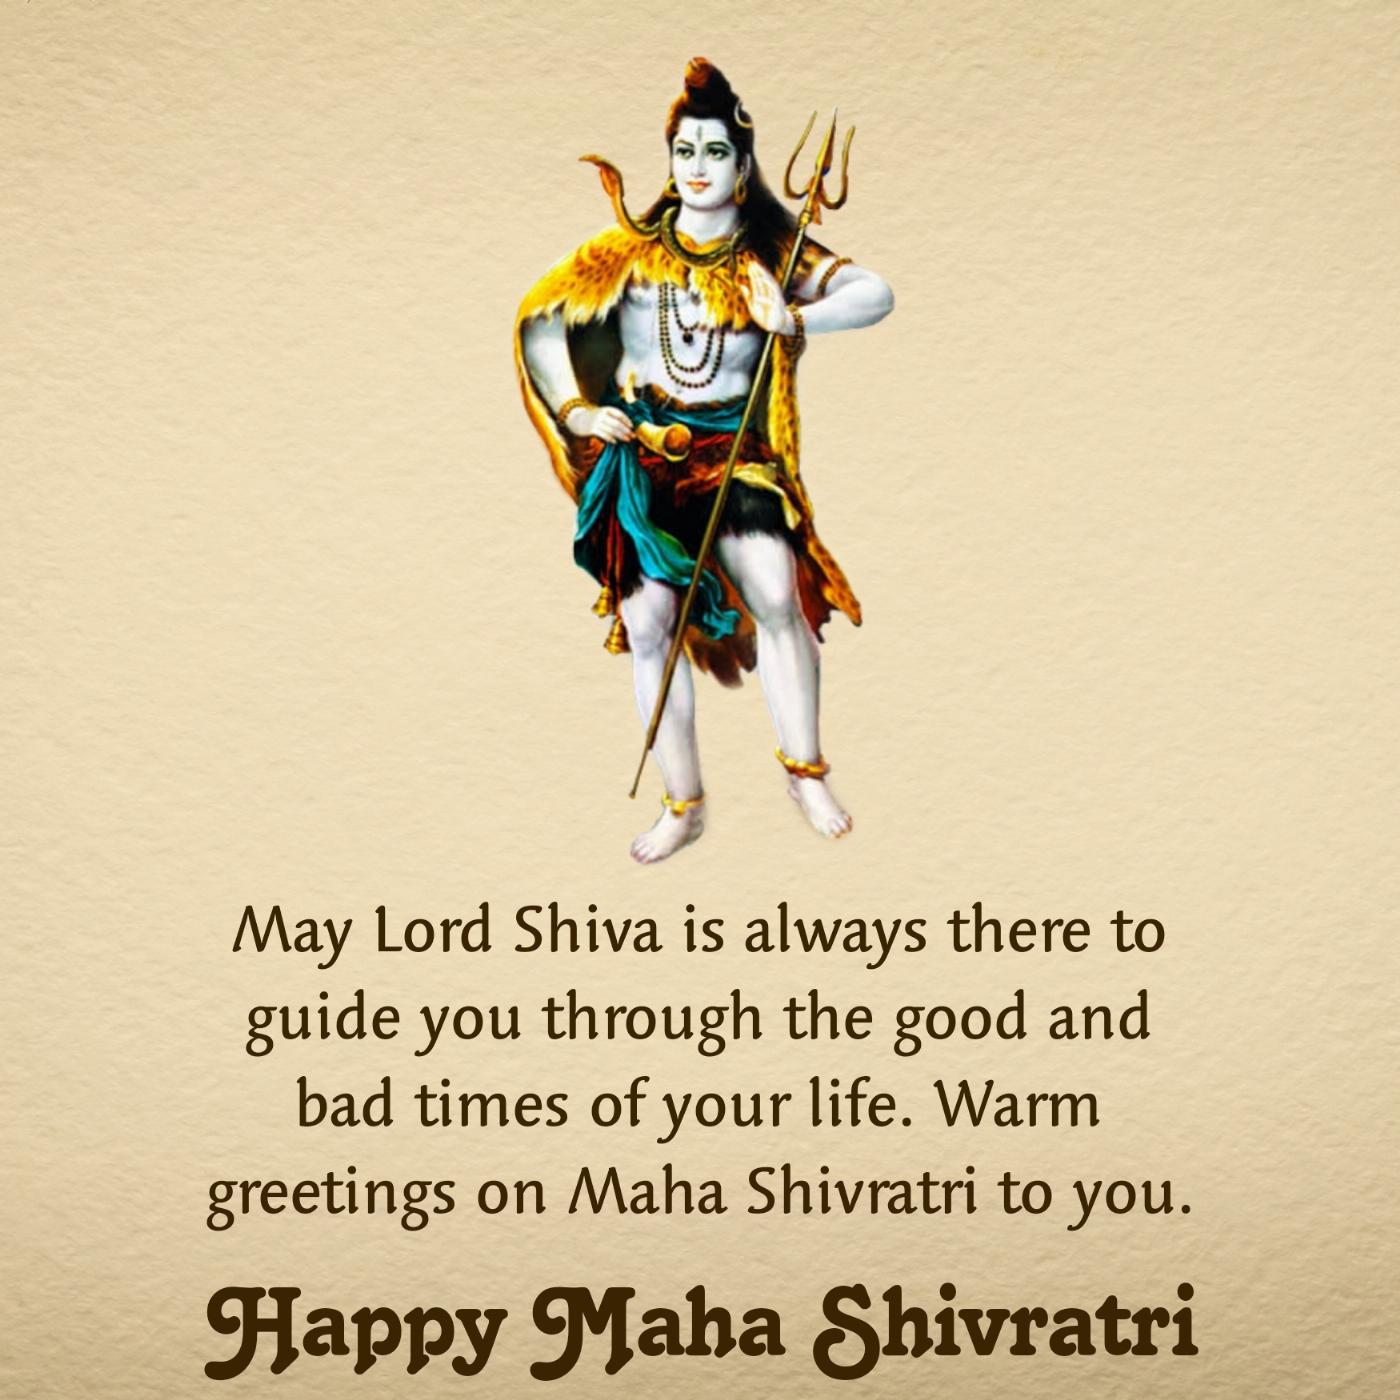 May Lord Shiva is always there to guide you through the good and bad